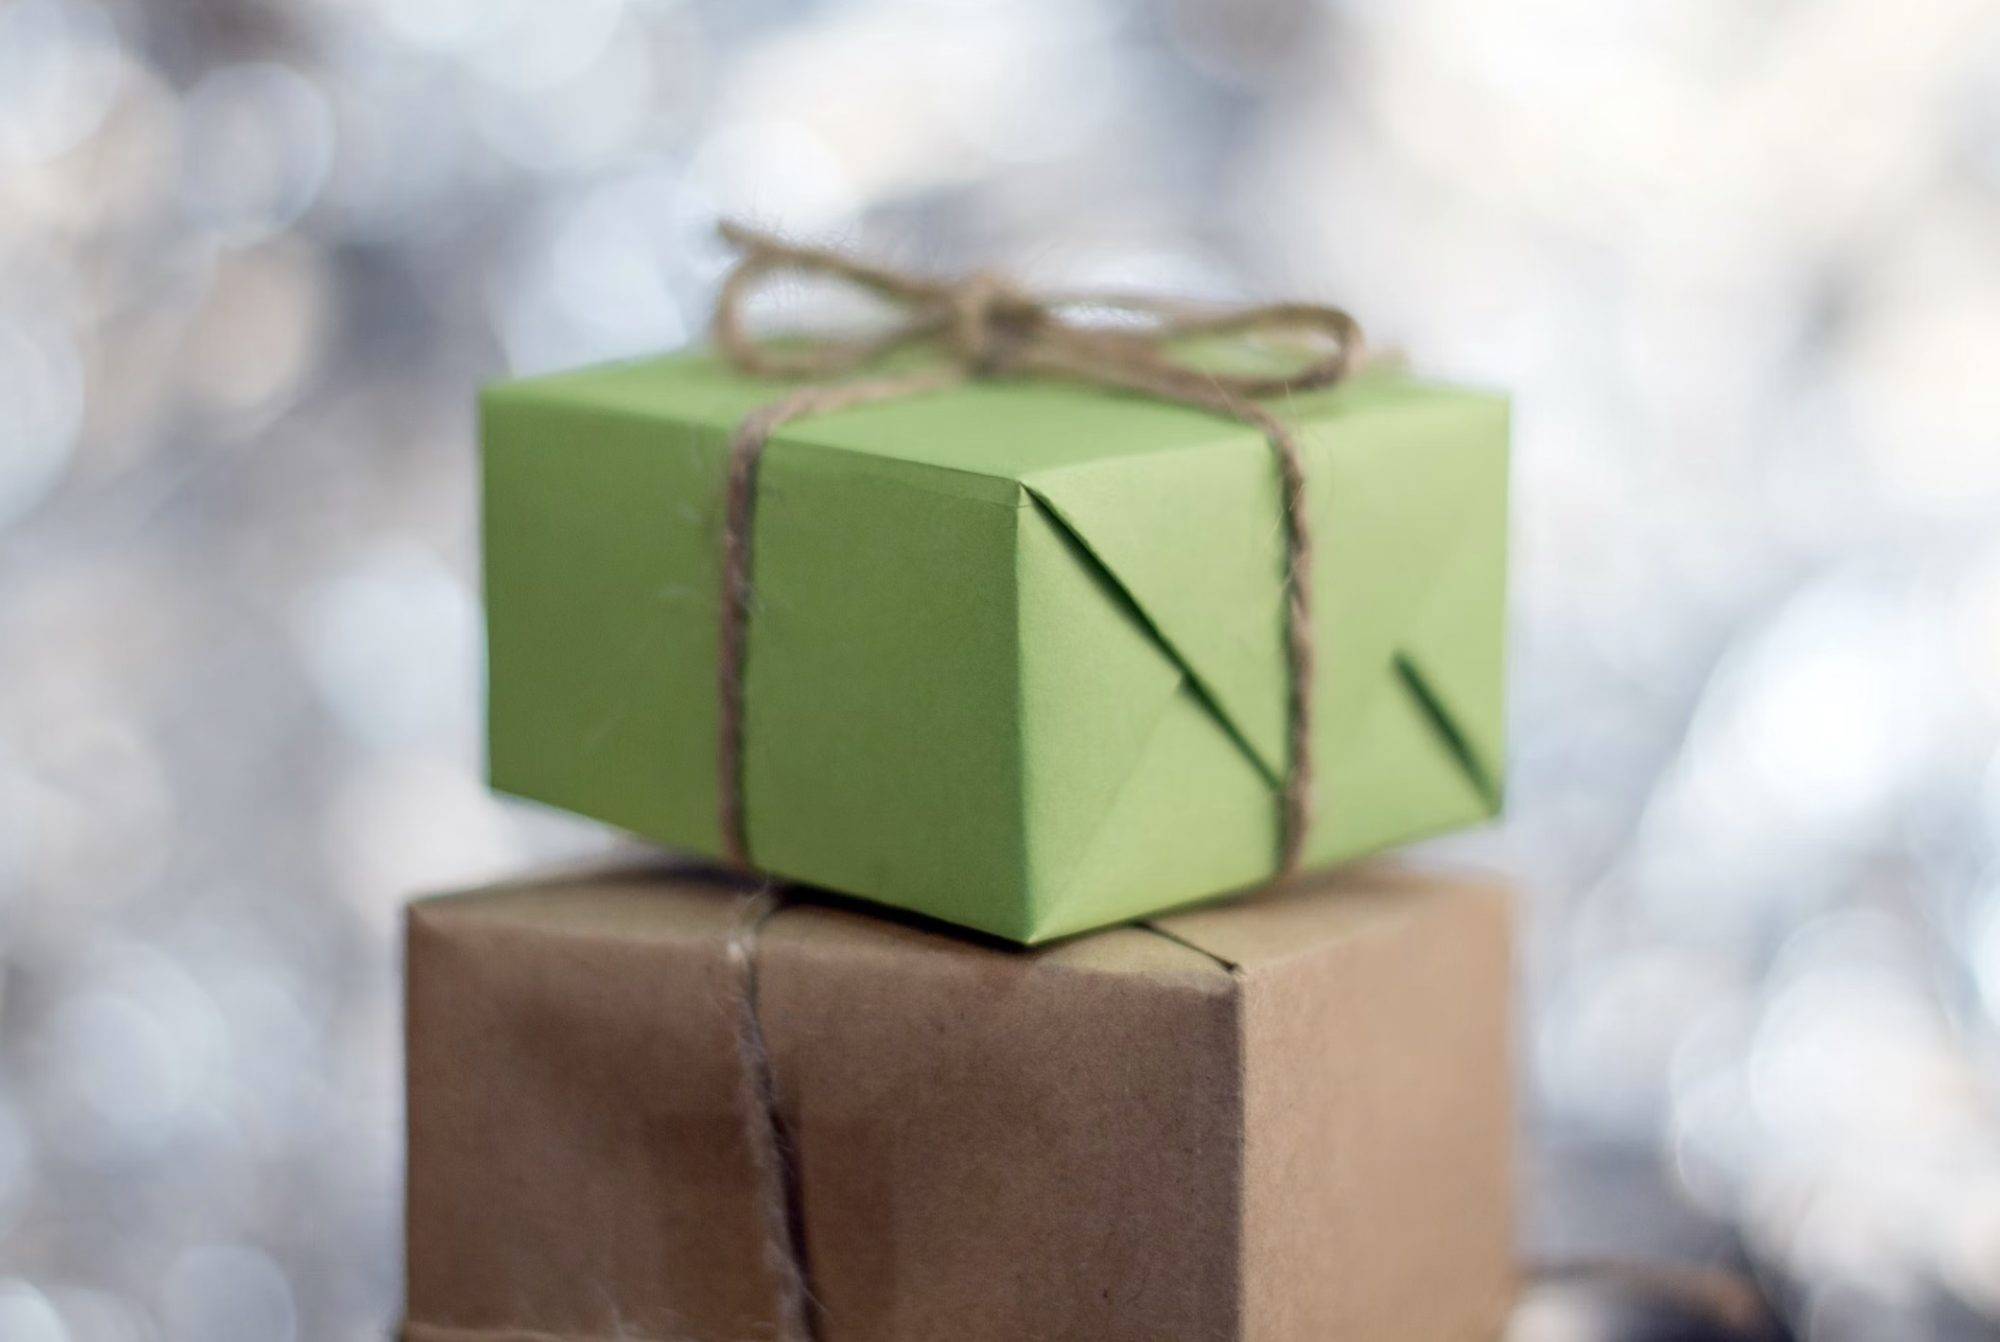 5 ideas for holiday gifts for clients - InvestmentNews